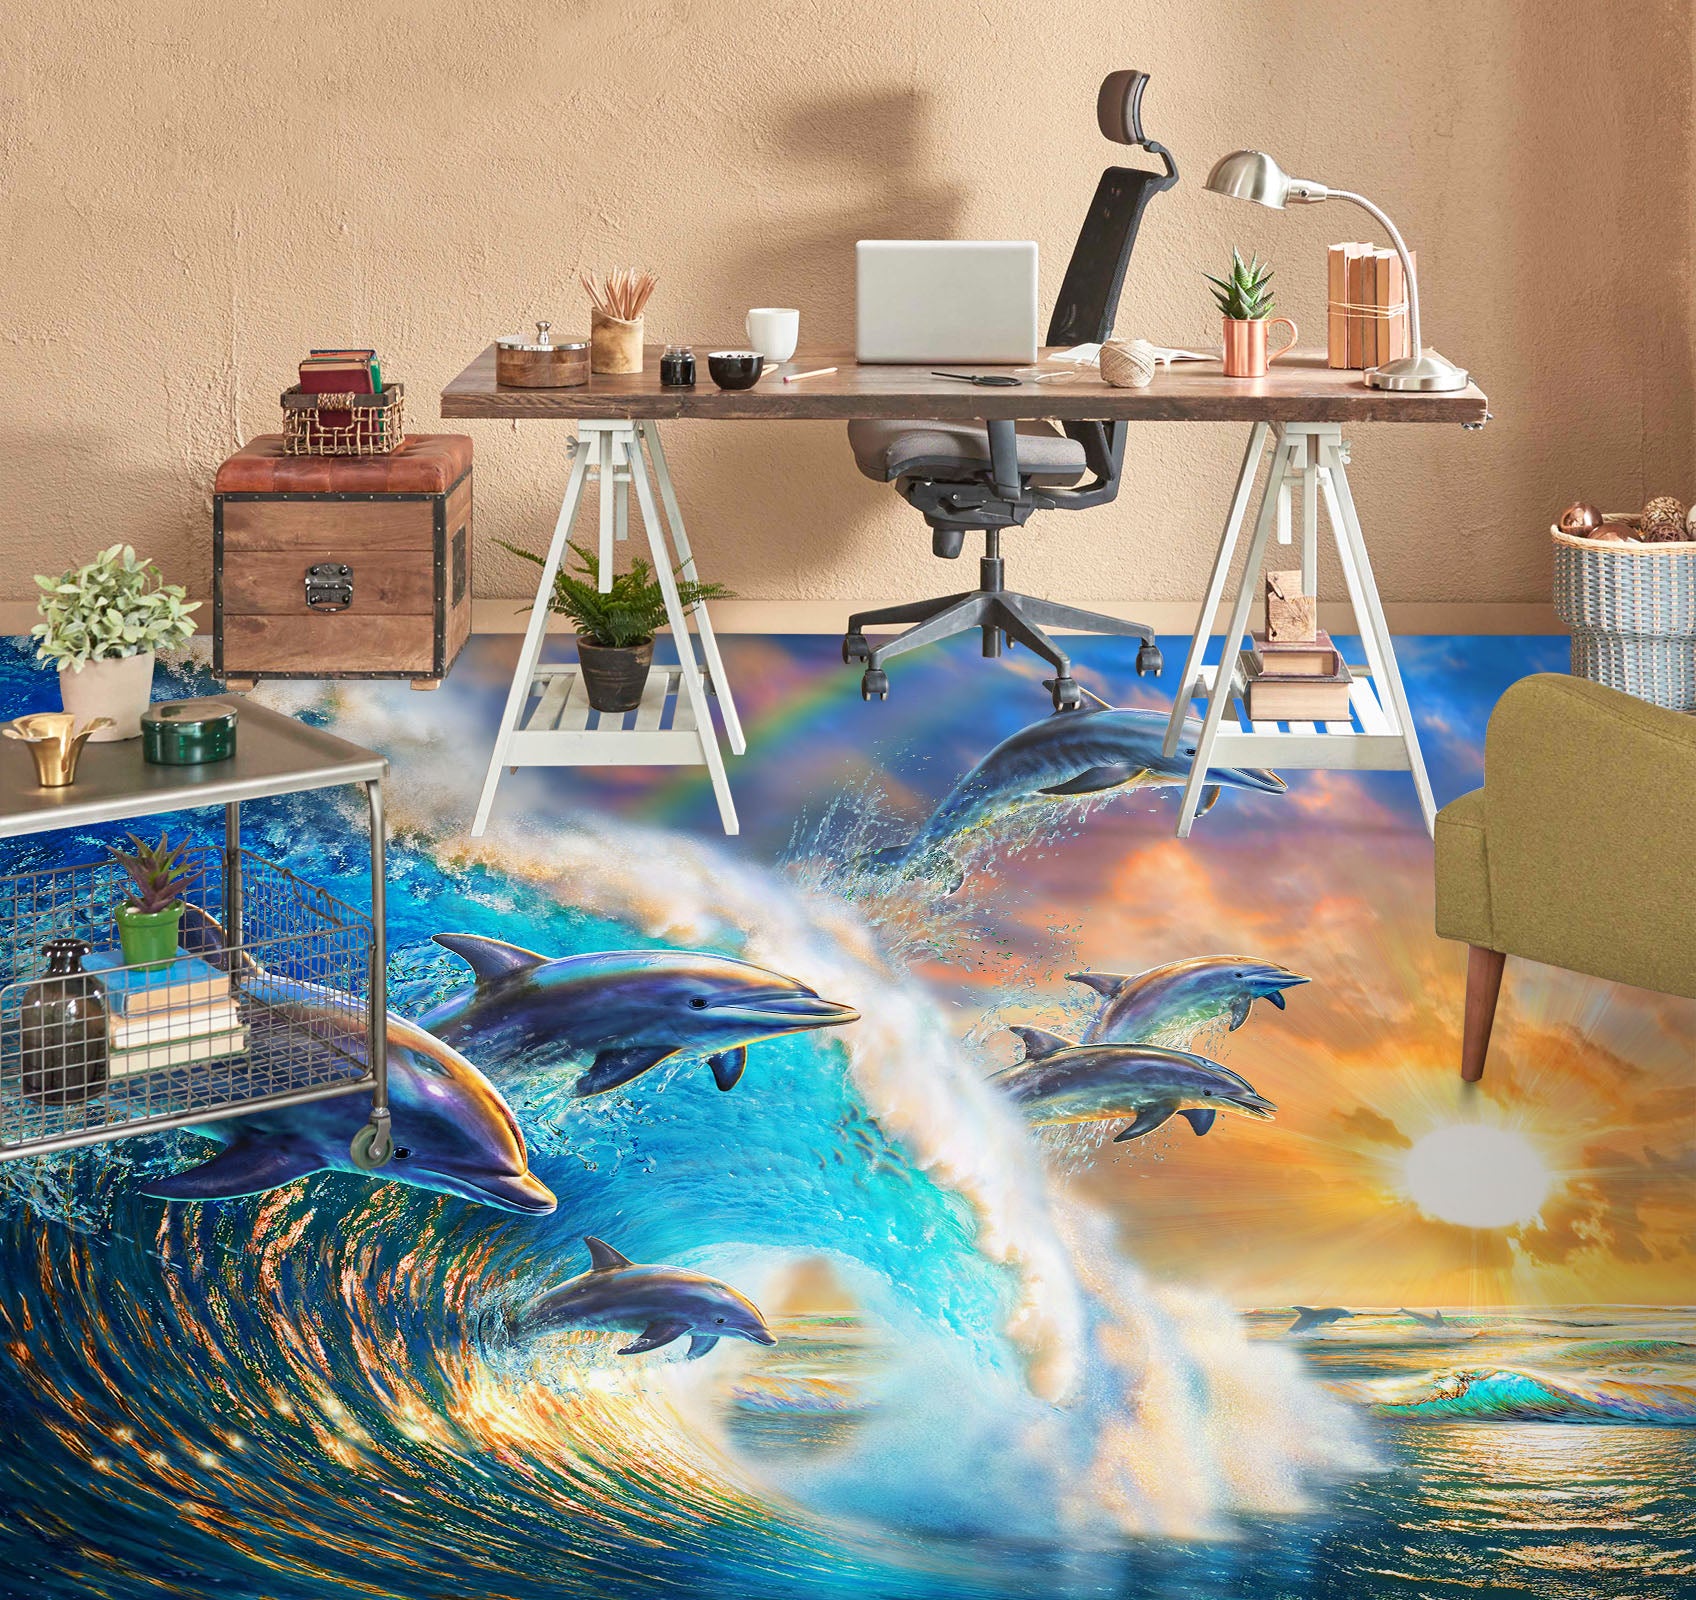 3D Surf Dolphin 96216 Adrian Chesterman Floor Mural  Wallpaper Murals Self-Adhesive Removable Print Epoxy